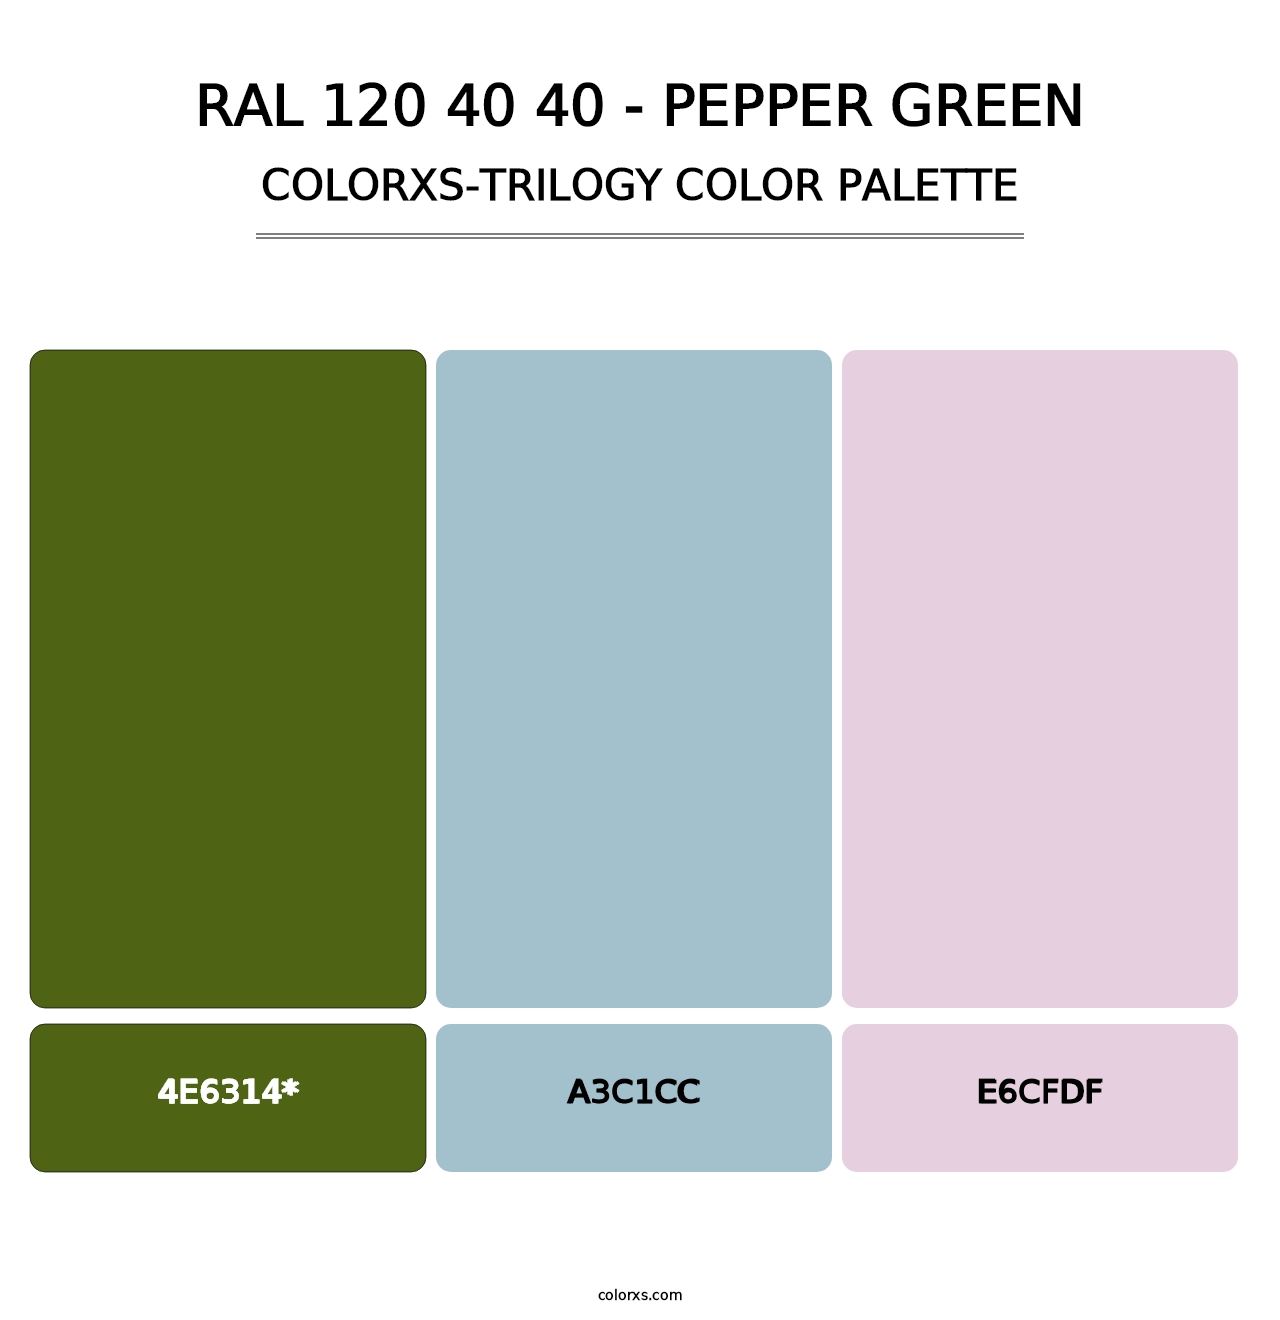 RAL 120 40 40 - Pepper Green - Colorxs Trilogy Palette